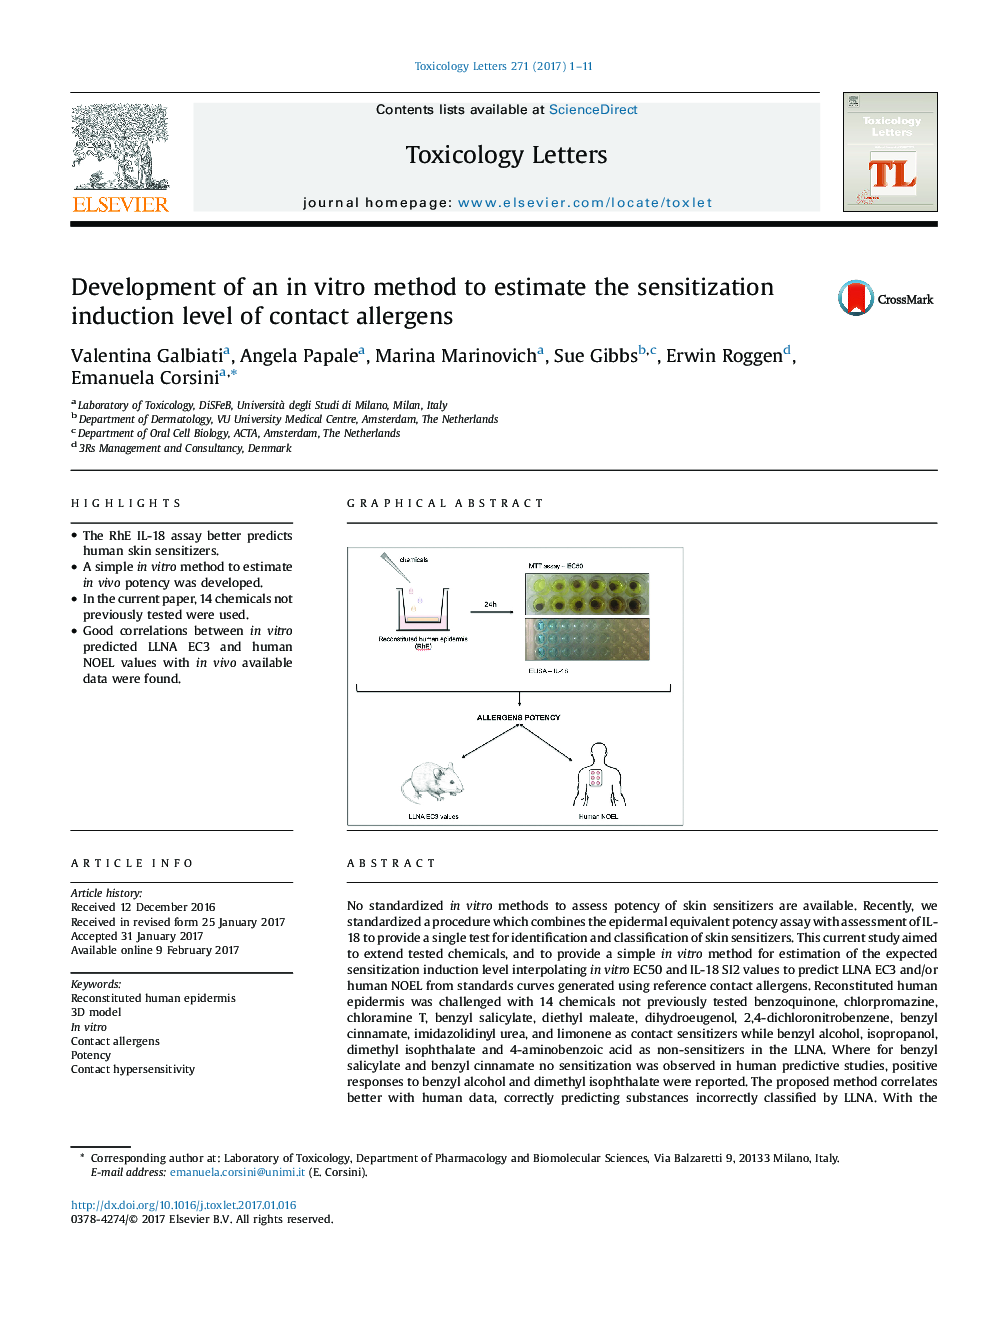 Development of an in vitro method to estimate the sensitization induction level of contact allergens